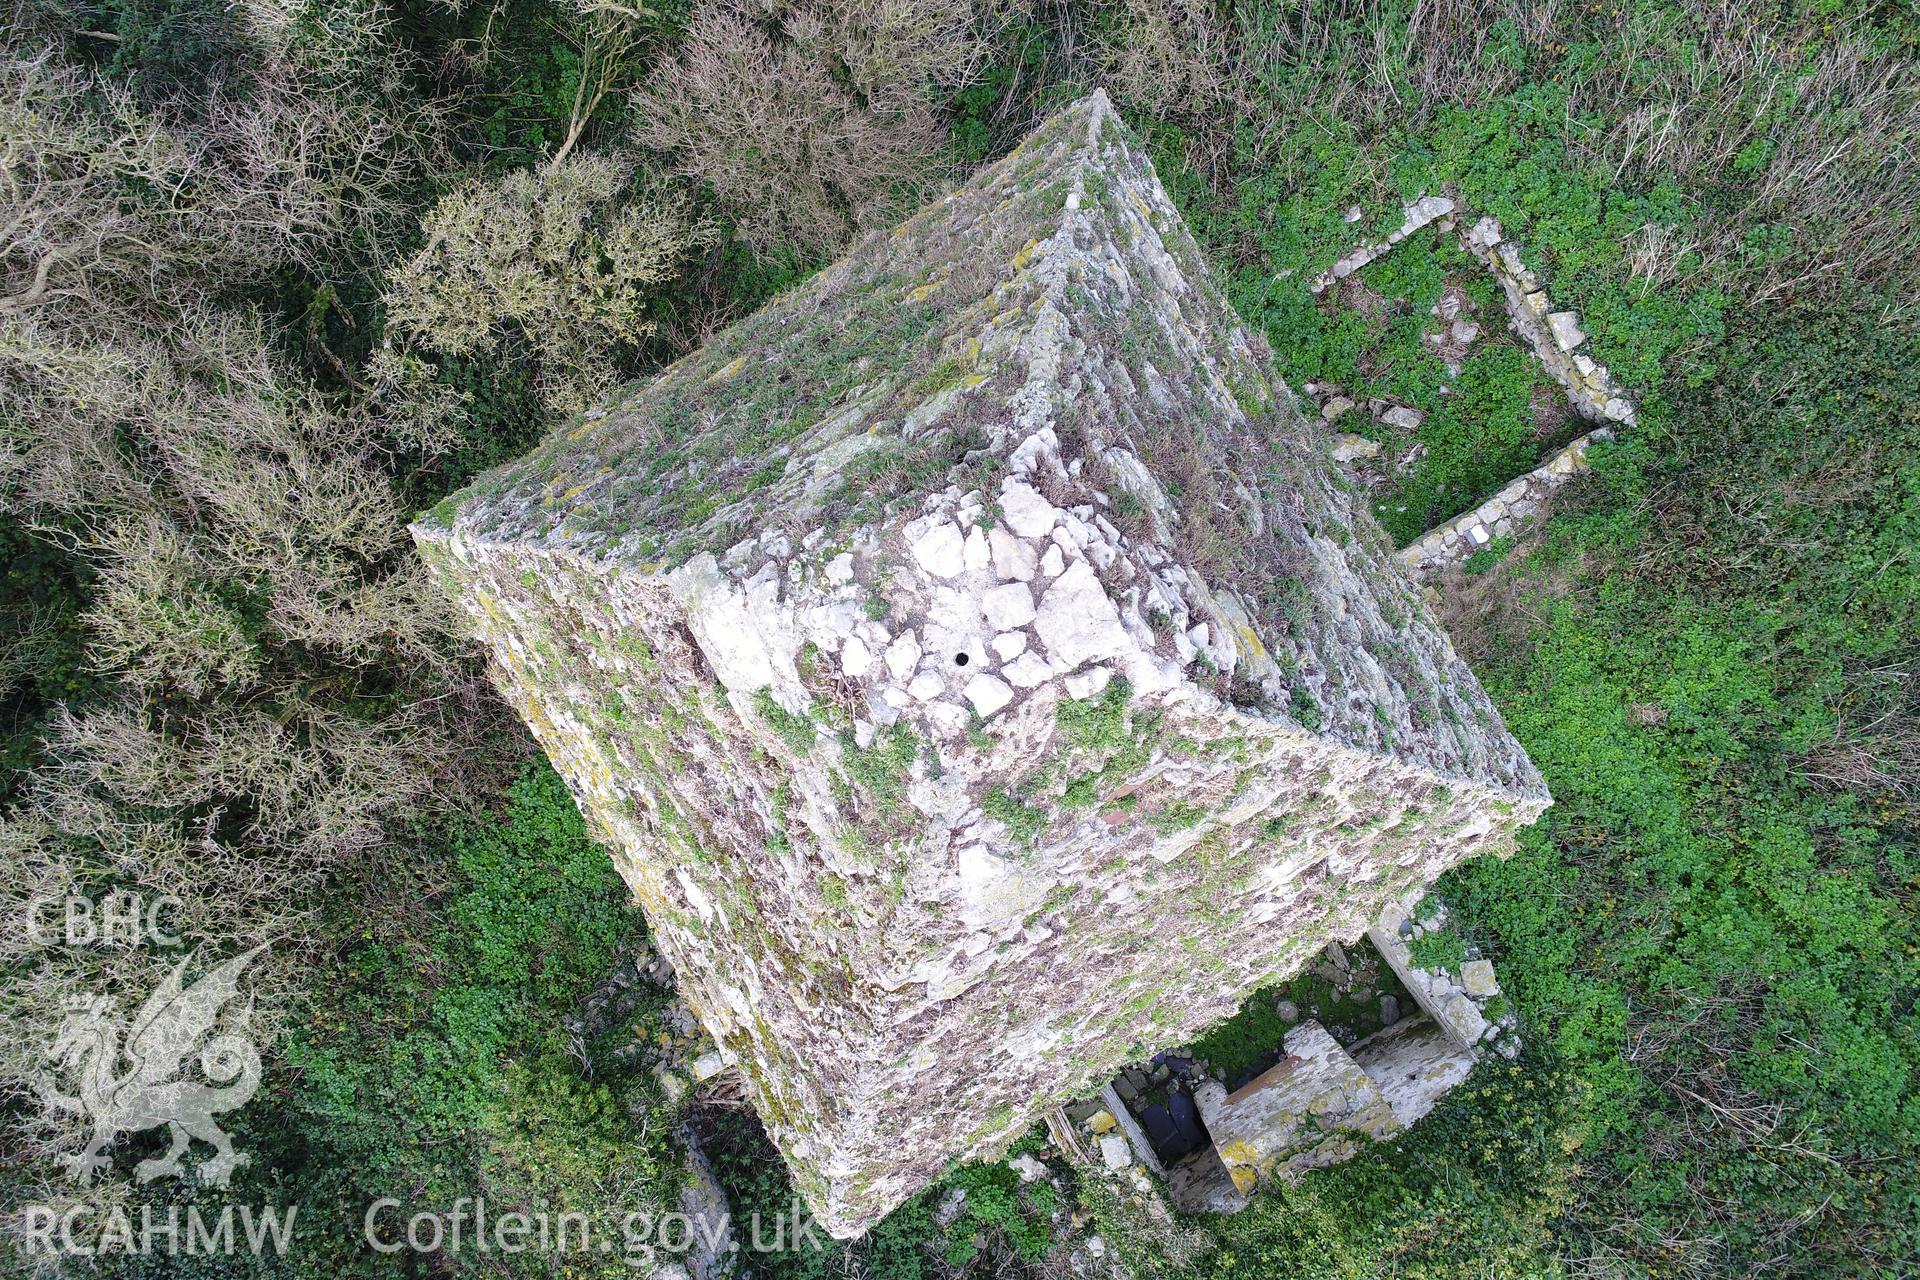 Investigator's drone/UAV survey of the church and monastic settlement on Puffin Island or Ynys Seiriol for the CHERISH Project. ? Crown: CHERISH PROJECT 2018. Produced with EU funds through the Ireland Wales Co-operation Programme 2014-2020. All material made freely available through the Open Government Licence.